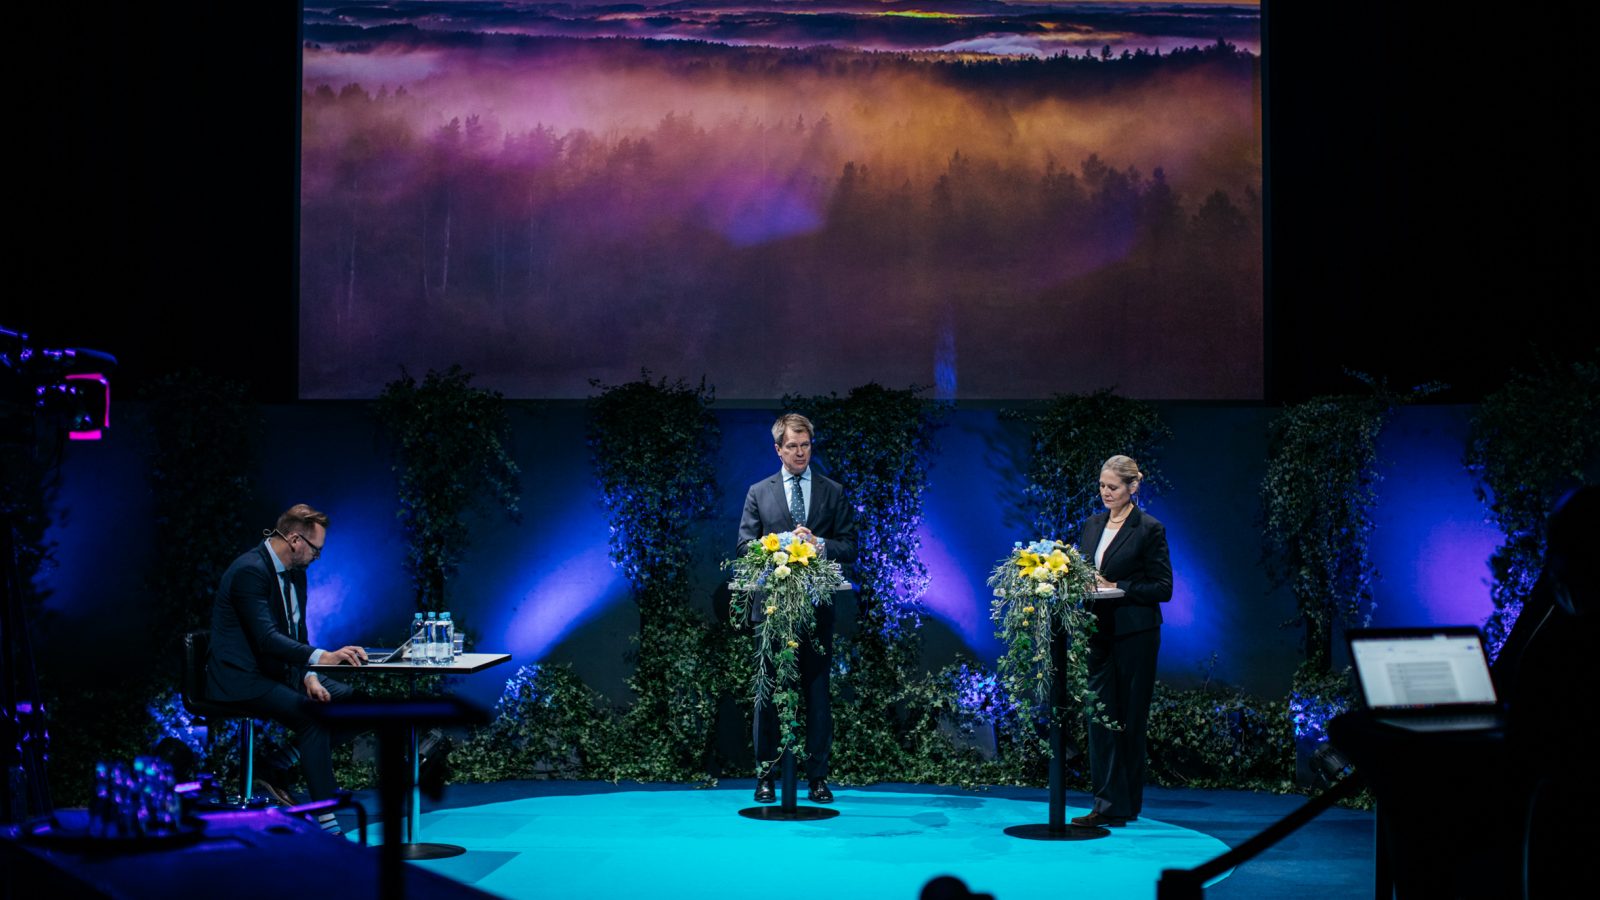 Three people dressed in dark business suits on a stage with flowers and green plants.